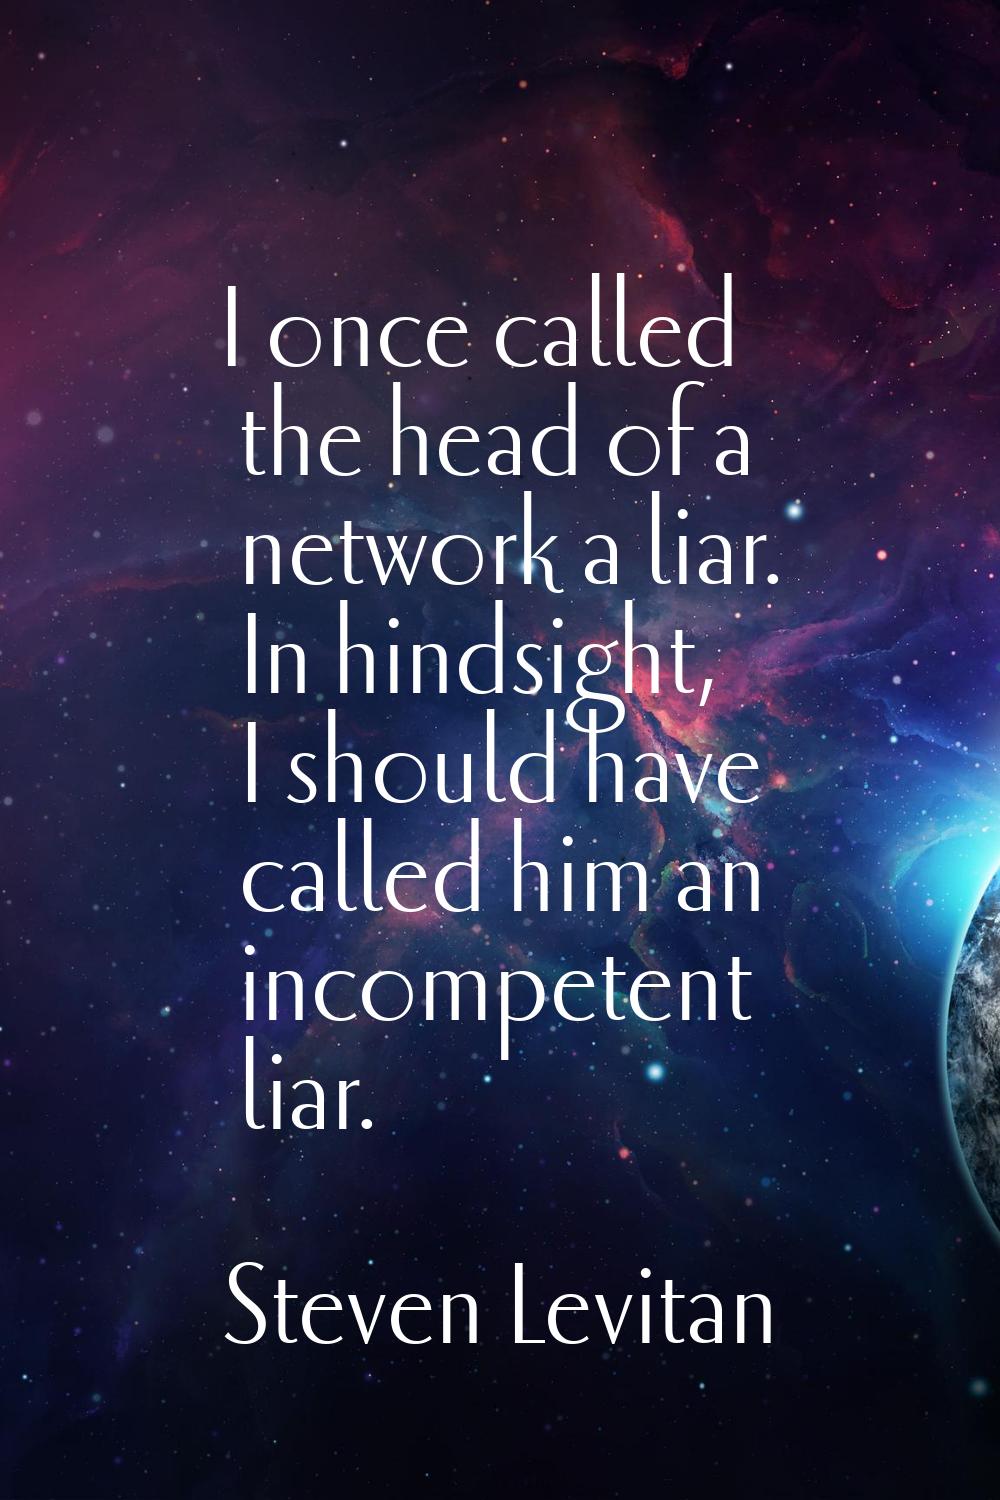 I once called the head of a network a liar. In hindsight, I should have called him an incompetent l